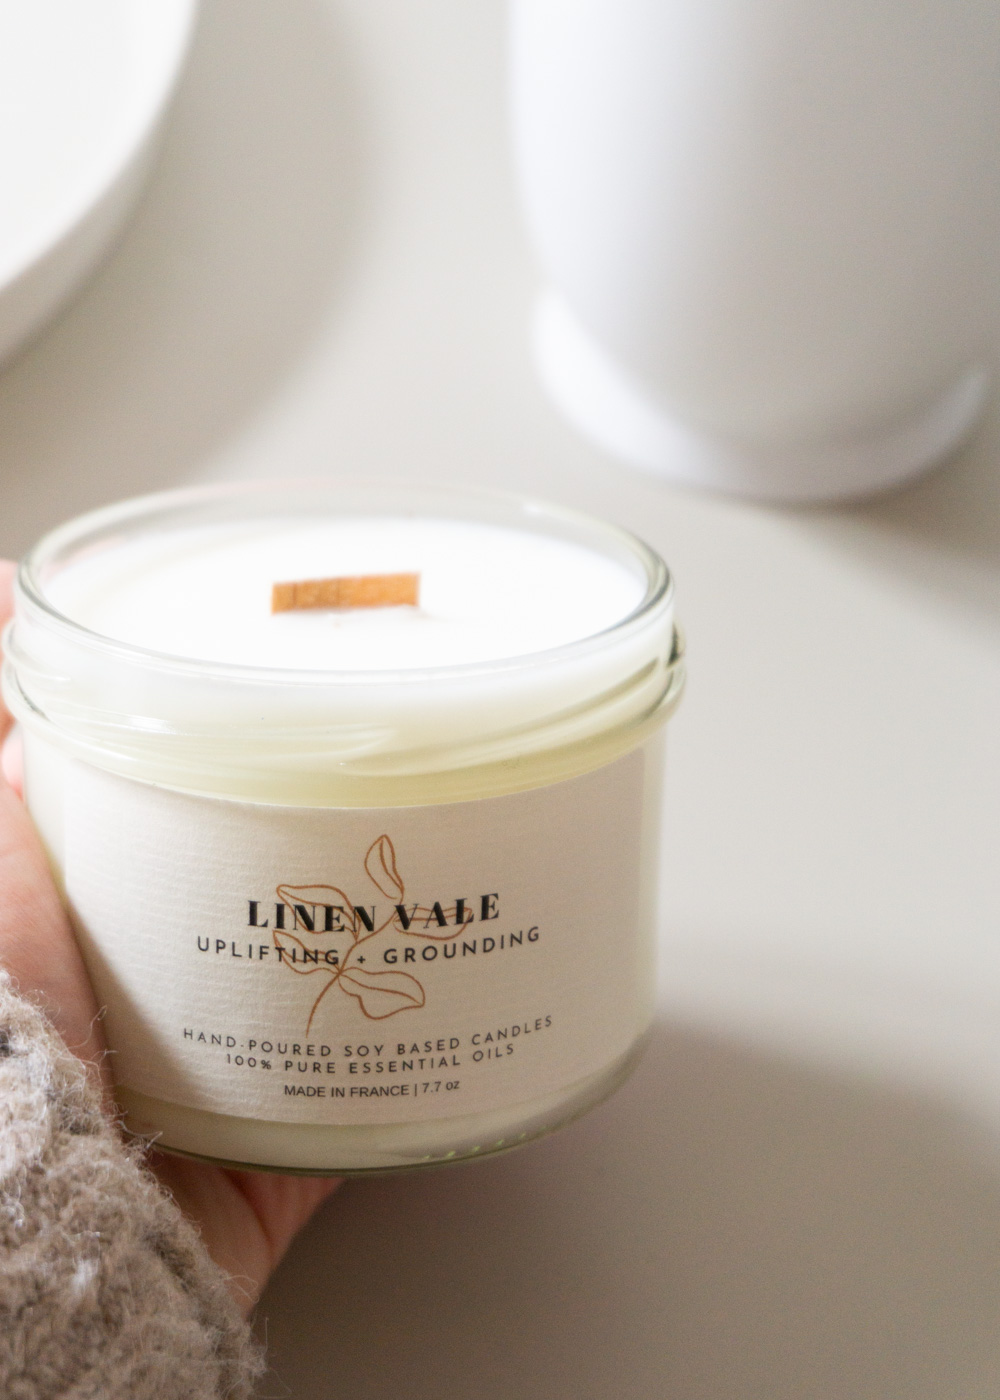 Linen Vale, Natural Soy Candles Handmade in France ~ Simple For Everyday Slow Living | Minimalist Home, Scandinavian Design, Sustainable Brand, Natural Aesthetic | Product Photography, Light and Shadows | RG Daily Blog, Copyright © Rebecca Goddard